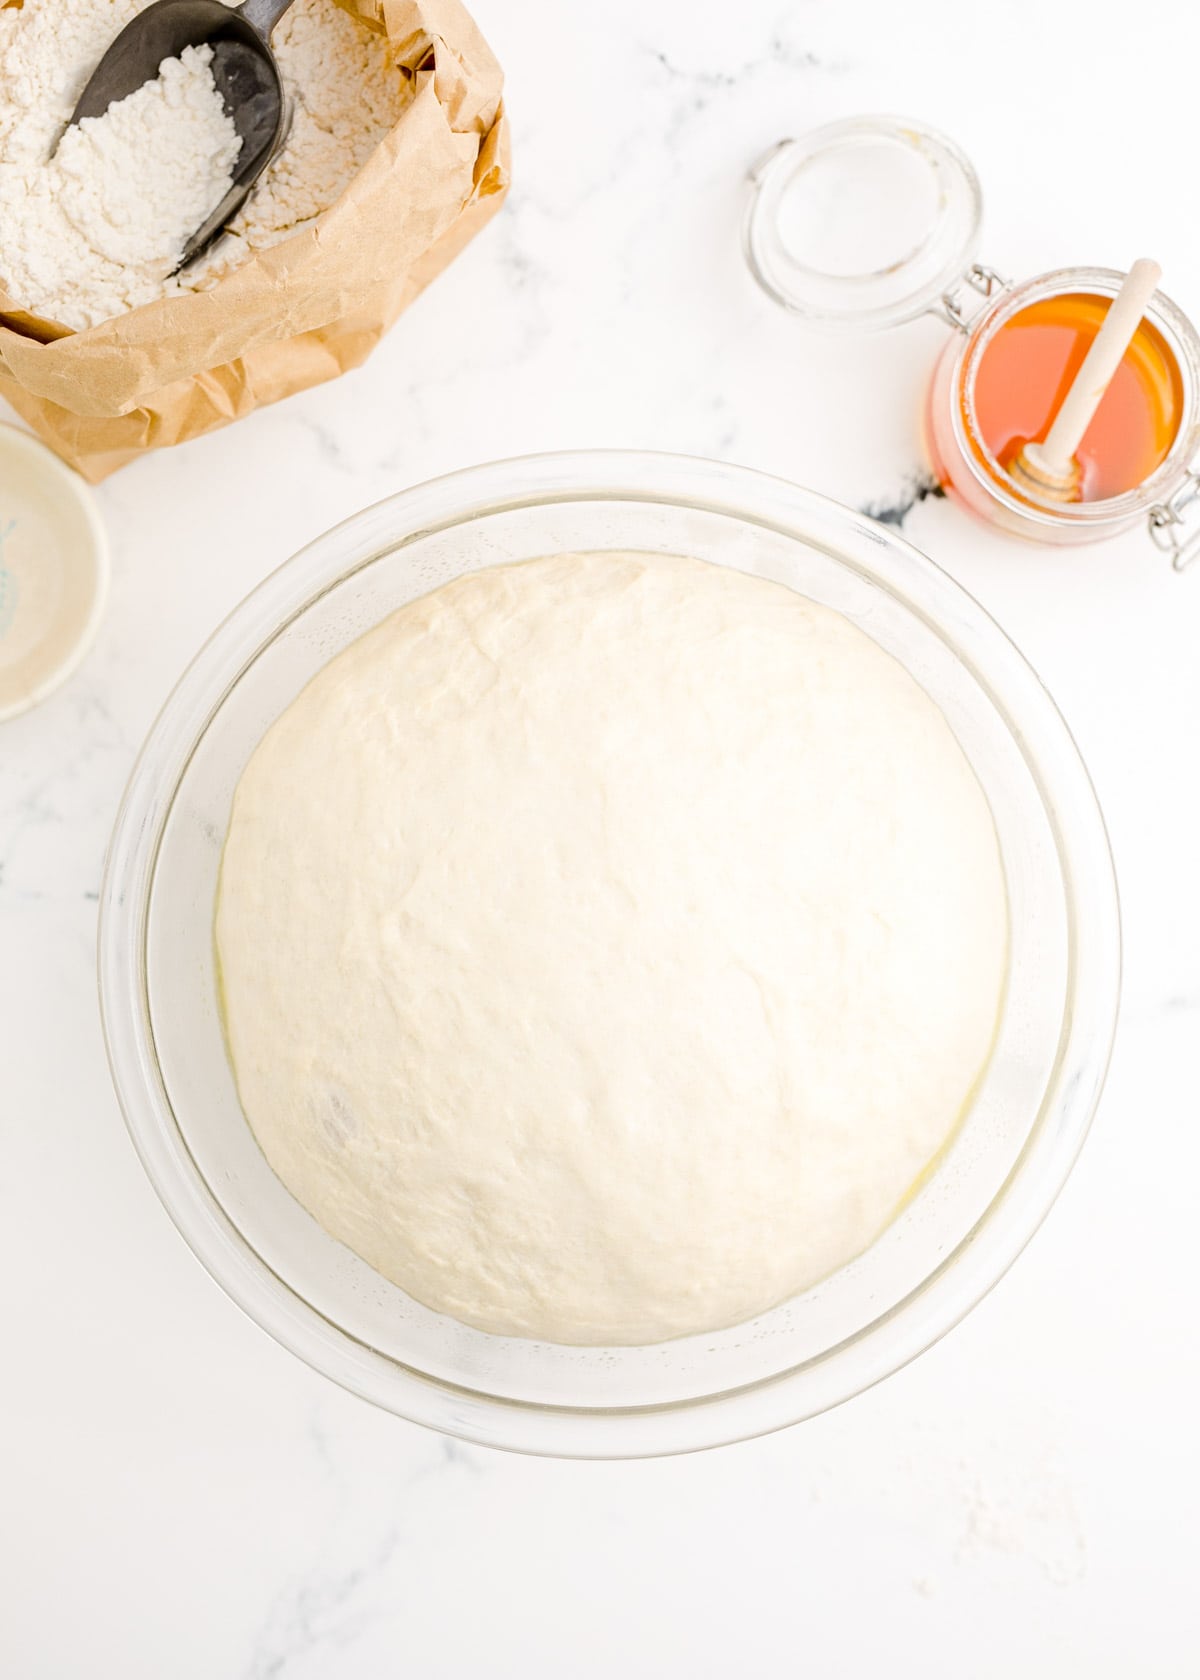 bagel dough risen double its size in a clear bowl